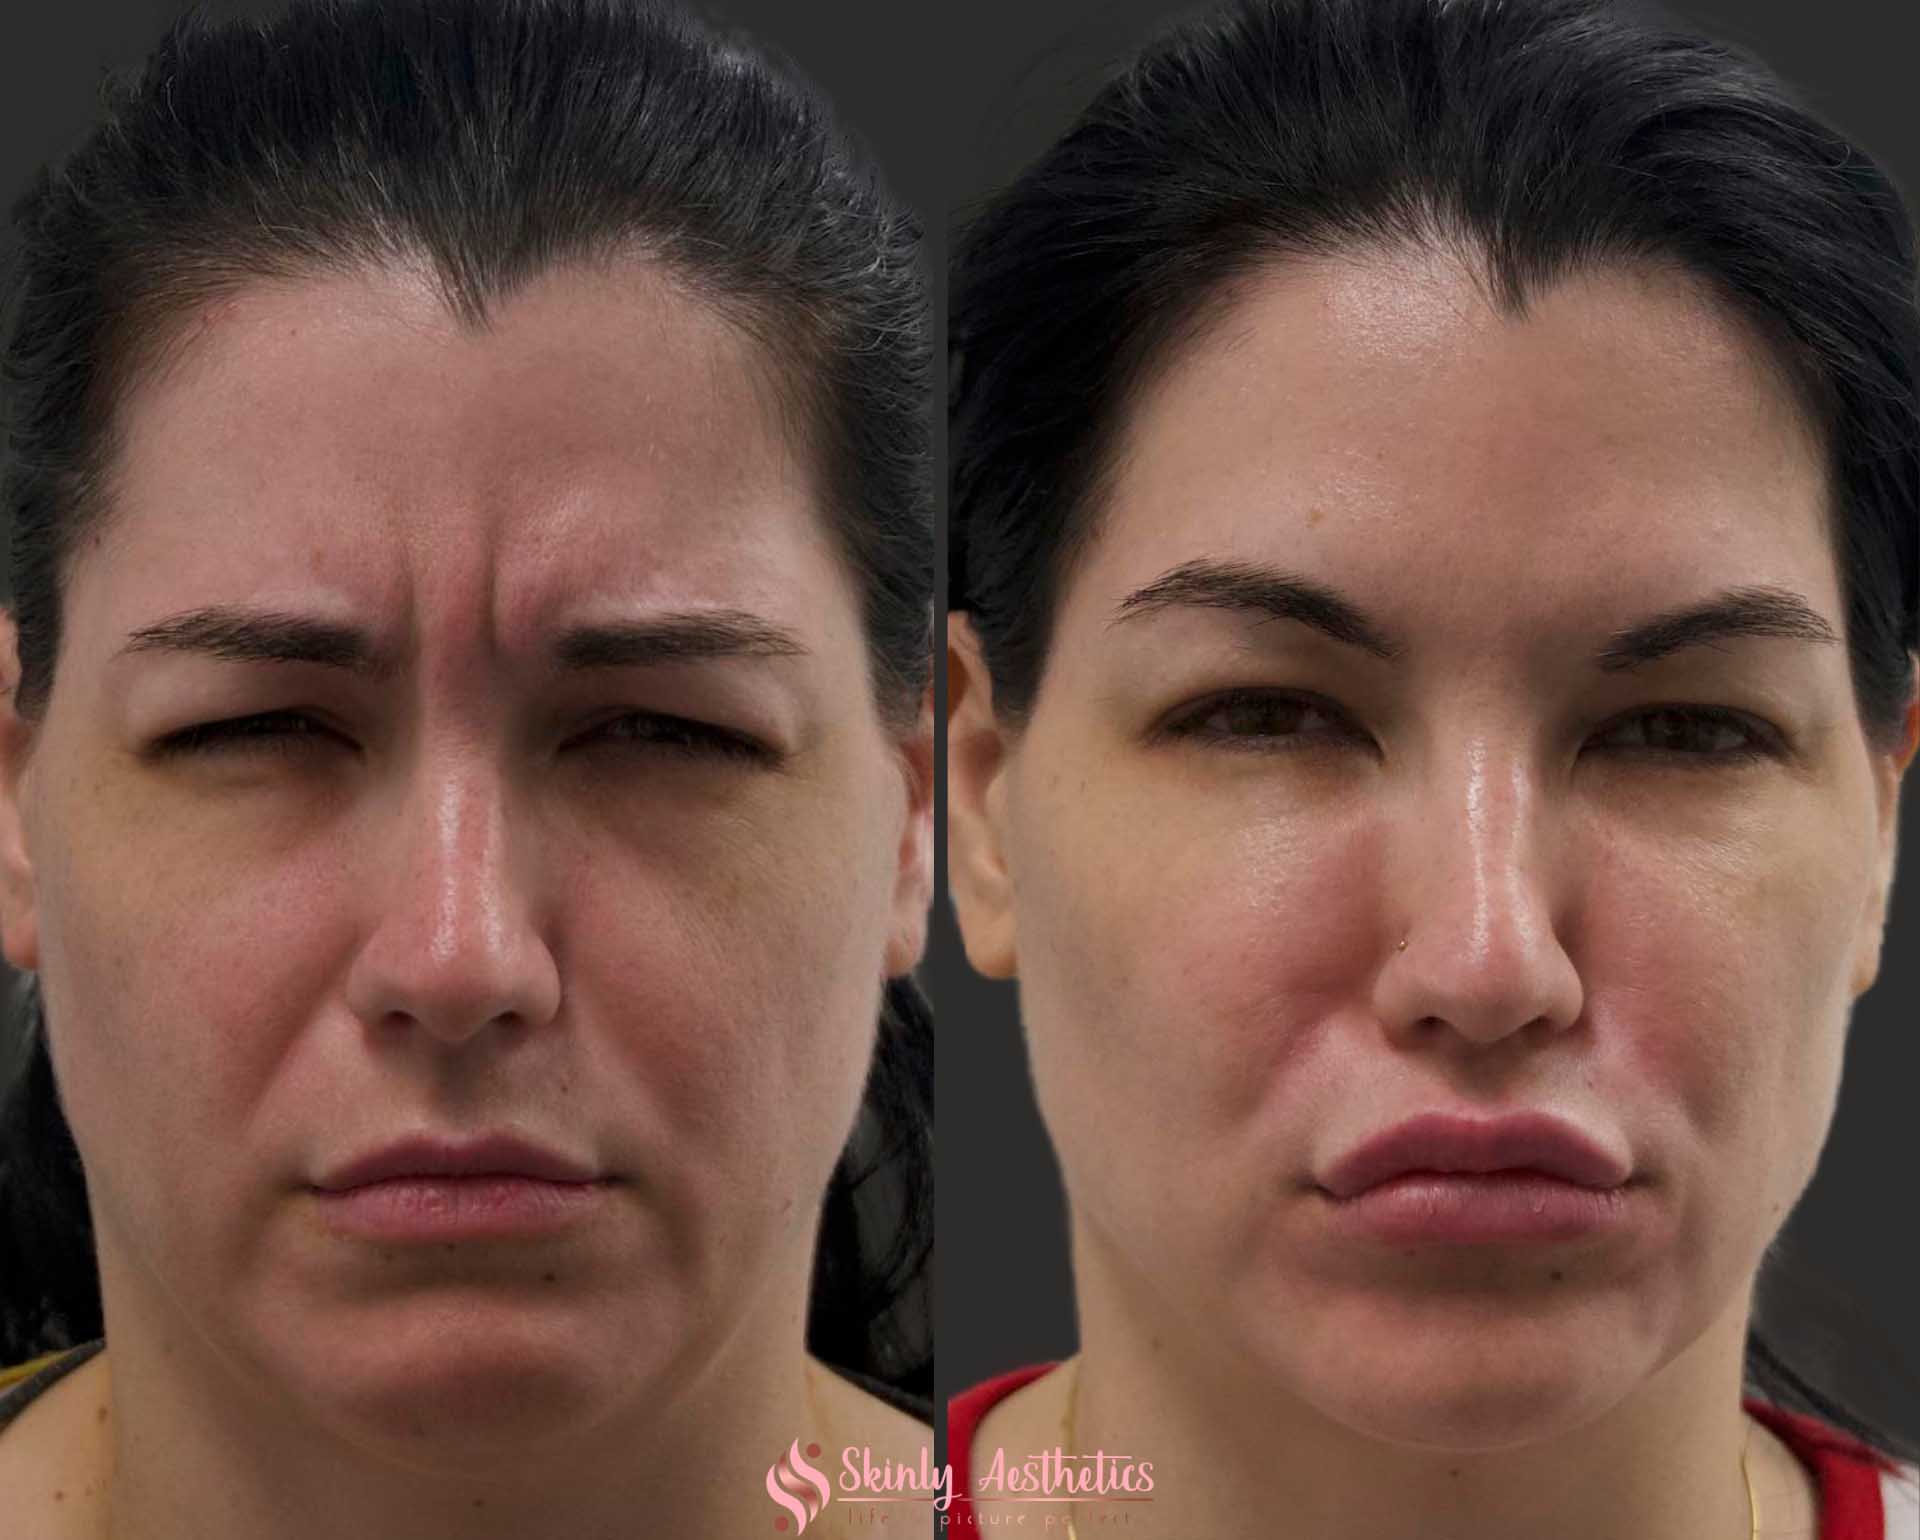 before and after results of botox glabella injections for frown lines